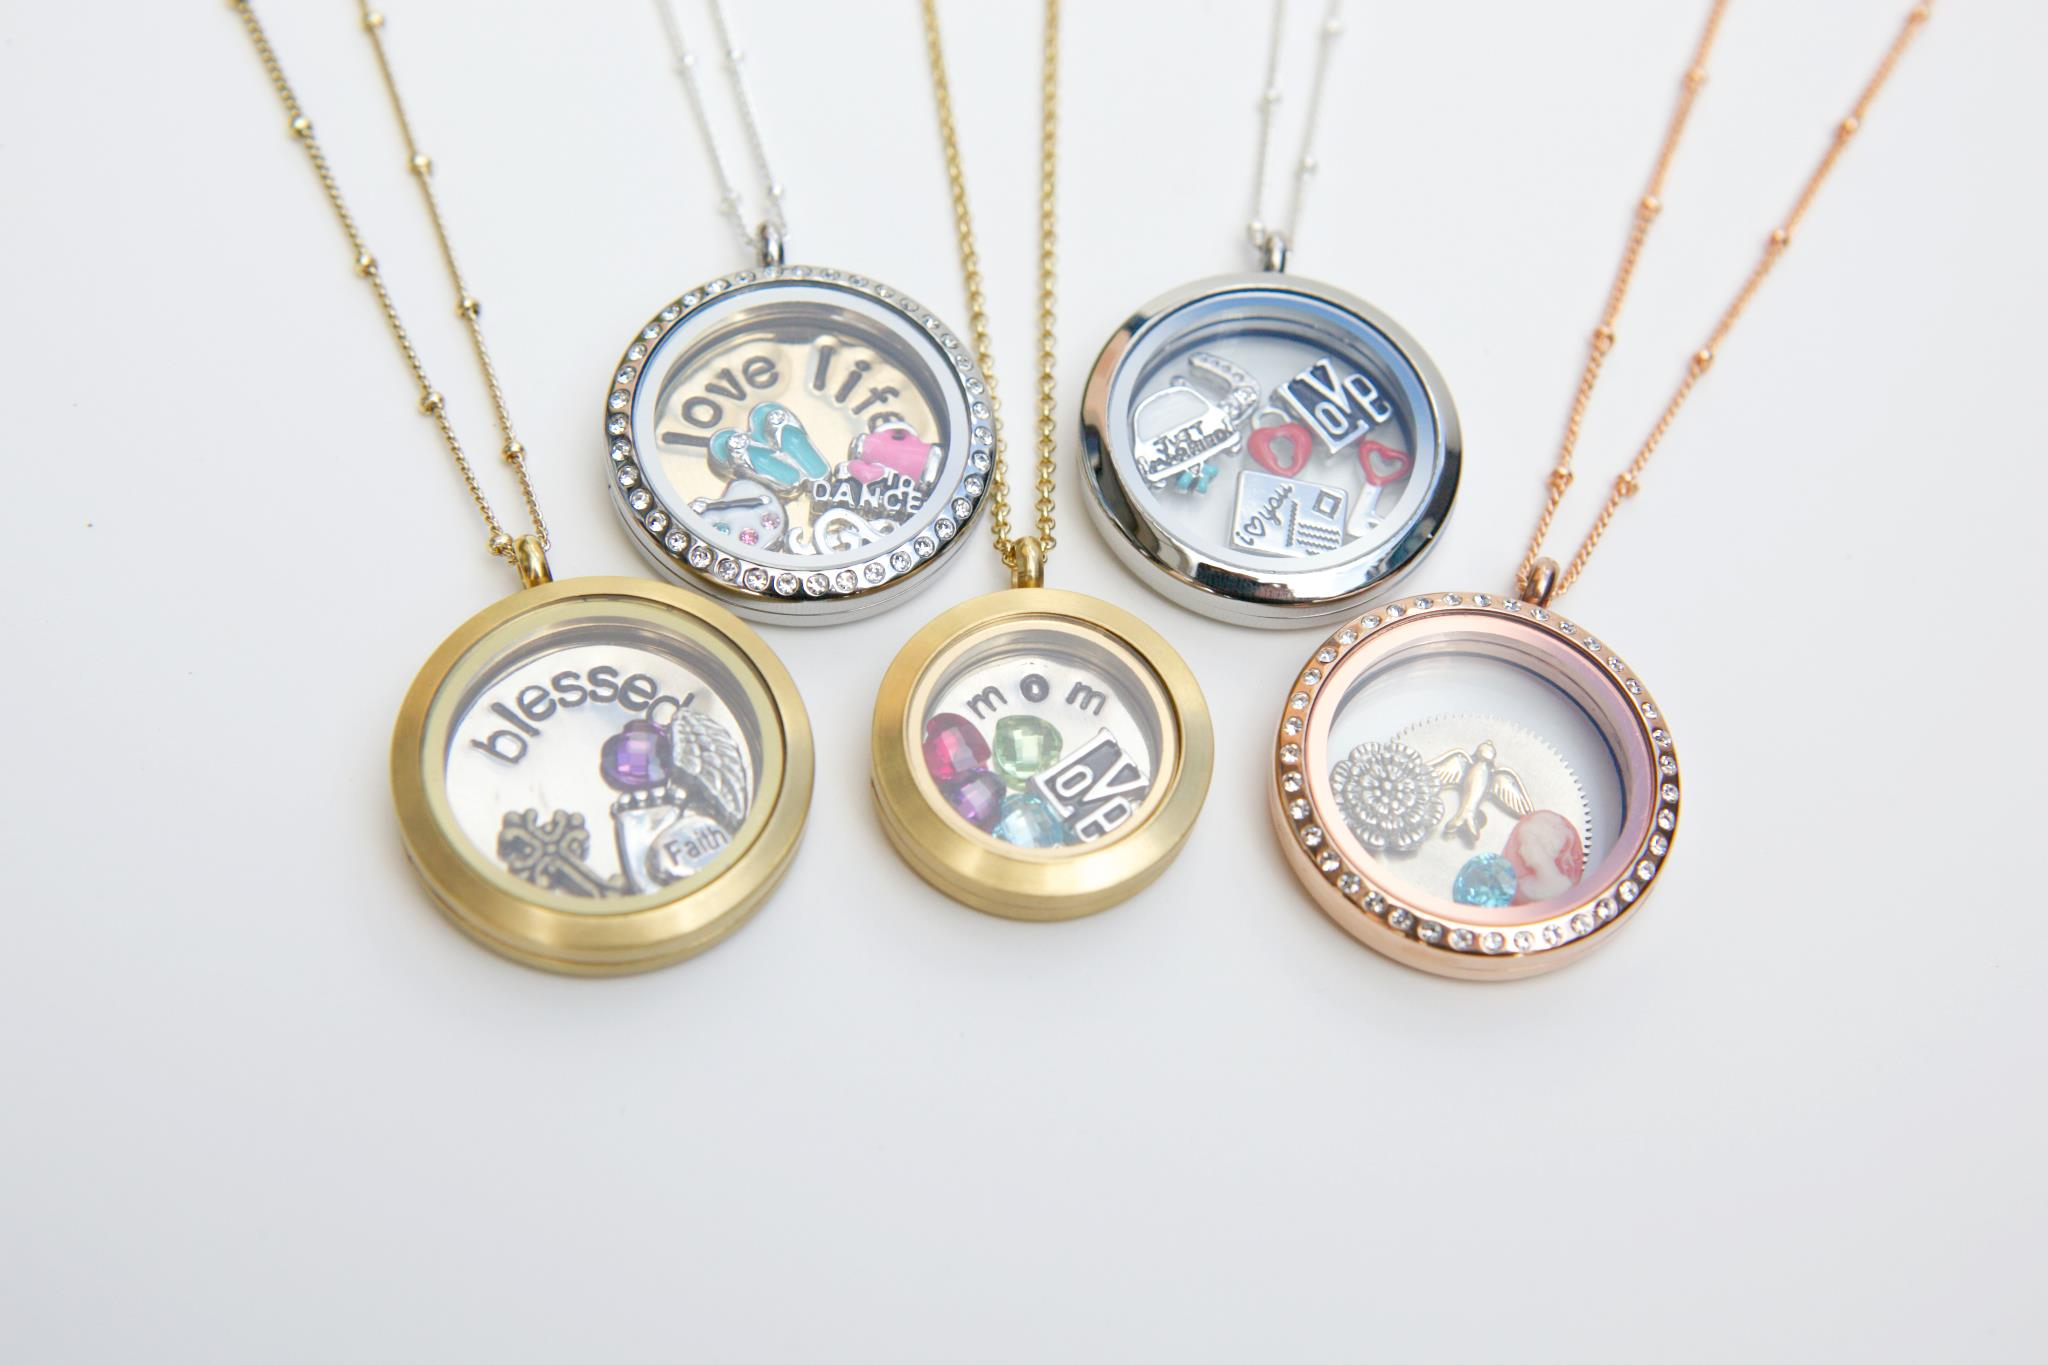 Where To Buy Origami Owl Buy Origami Owl Jewelry Online Charms Necklace Products